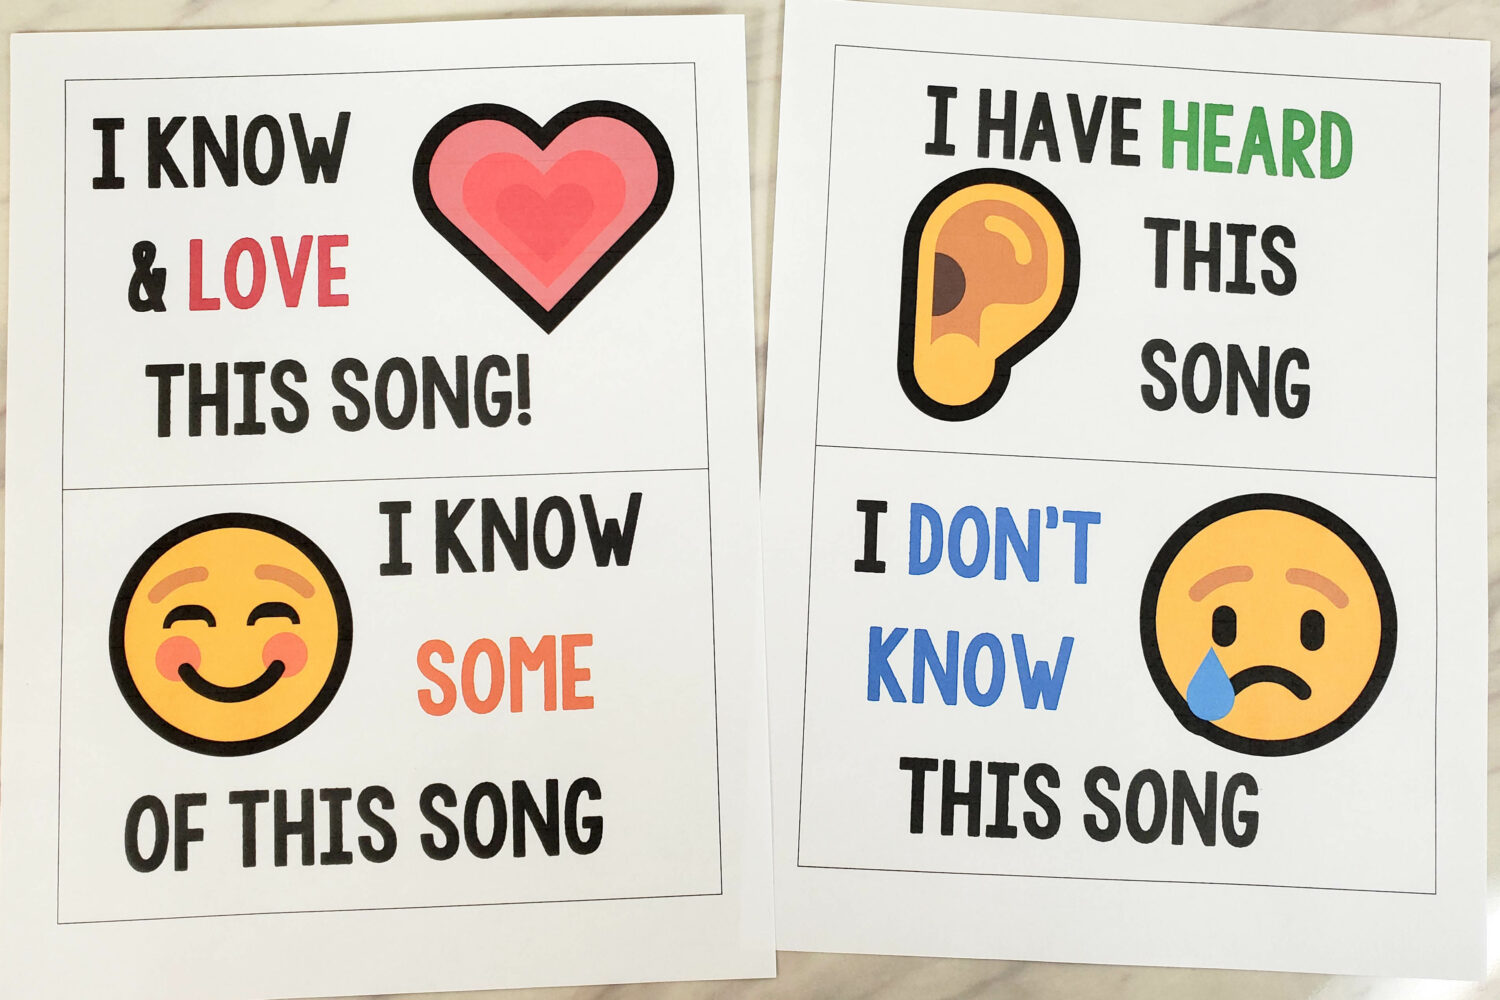 New Year Song Scramble fun singing time game and activity to help you introduce your songs for the year and see how well the kids know the songs already - with movement! Grab these no-prep signs for your walls and get to it with easy activities for LDS Primary music leaders.